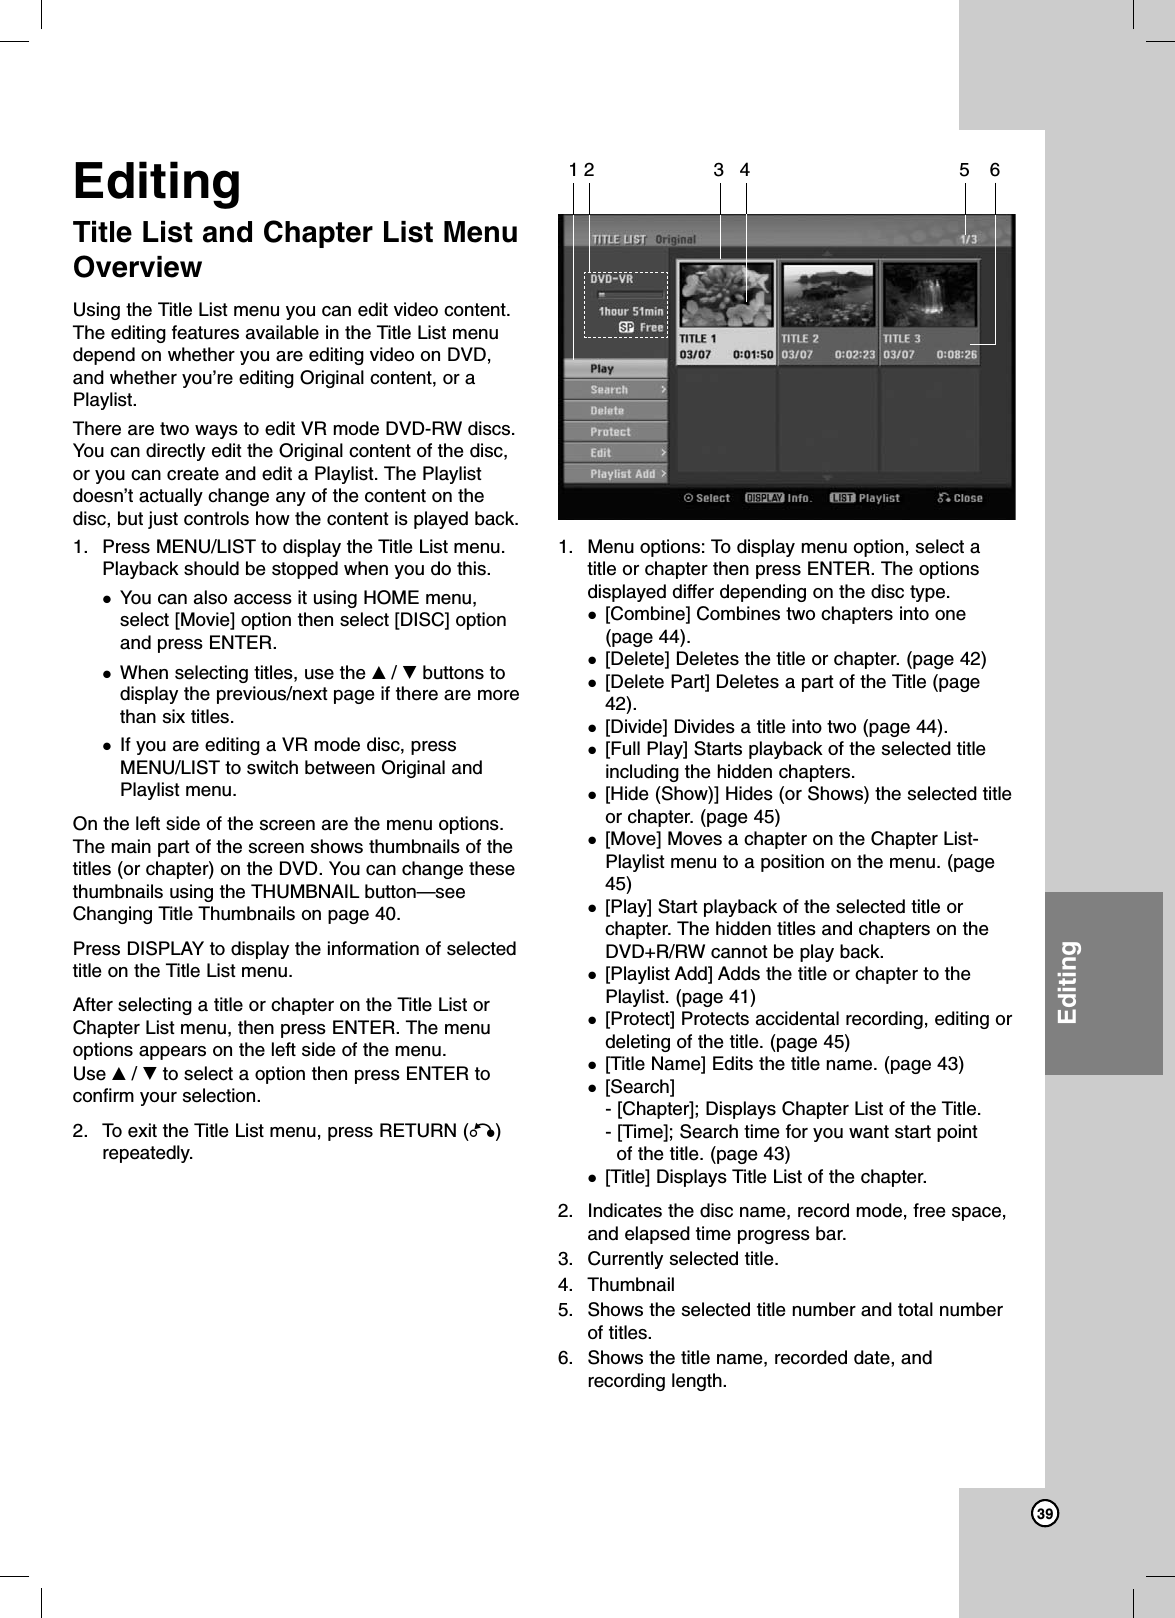 39EditingEditingTitle List and Chapter List MenuOverview Using the Title List menu you can edit video content.The editing features available in the Title List menudepend on whether you are editing video on DVD,and whether you’re editing Original content, or aPlaylist.There are two ways to edit VR mode DVD-RW discs.You can directly edit the Original content of the disc,or you can create and edit a Playlist. The Playlistdoesn’t actually change any of the content on thedisc, but just controls how the content is played back.1. Press MENU/LIST to display the Title List menu.Playback should be stopped when you do this.You can also access it using HOME menu,select [Movie] option then select [DISC] optionand press ENTER.When selecting titles, use the v/ Vbuttons todisplay the previous/next page if there are morethan six titles.If you are editing a VR mode disc, pressMENU/LIST to switch between Original andPlaylist menu.On the left side of the screen are the menu options.The main part of the screen shows thumbnails of thetitles (or chapter) on the DVD. You can change thesethumbnails using the THUMBNAIL button—seeChanging Title Thumbnails on page 40.Press DISPLAY to display the information of selectedtitle on the Title List menu.After selecting a title or chapter on the Title List orChapter List menu, then press ENTER. The menuoptions appears on the left side of the menu. Use v/ Vto select a option then press ENTER toconfirm your selection. 2. To exit the Title List menu, press RETURN (O)repeatedly.1. Menu options: To display menu option, select atitle or chapter then press ENTER. The optionsdisplayed differ depending on the disc type.[Combine] Combines two chapters into one(page 44).[Delete] Deletes the title or chapter. (page 42)[Delete Part] Deletes a part of the Title (page42).[Divide] Divides a title into two (page 44).[Full Play] Starts playback of the selected titleincluding the hidden chapters.[Hide (Show)] Hides (or Shows) the selected titleor chapter. (page 45)[Move] Moves a chapter on the Chapter List-Playlist menu to a position on the menu. (page45)[Play] Start playback of the selected title orchapter. The hidden titles and chapters on theDVD+R/RW cannot be play back.[Playlist Add] Adds the title or chapter to thePlaylist. (page 41)[Protect] Protects accidental recording, editing ordeleting of the title. (page 45)[Title Name] Edits the title name. (page 43)[Search] - [Chapter]; Displays Chapter List of the Title.- [Time]; Search time for you want start pointof the title. (page 43)[Title] Displays Title List of the chapter.2. Indicates the disc name, record mode, free space,and elapsed time progress bar.3. Currently selected title.4. Thumbnail5. Shows the selected title number and total numberof titles.6. Shows the title name, recorded date, andrecording length.12 3 4 5 6